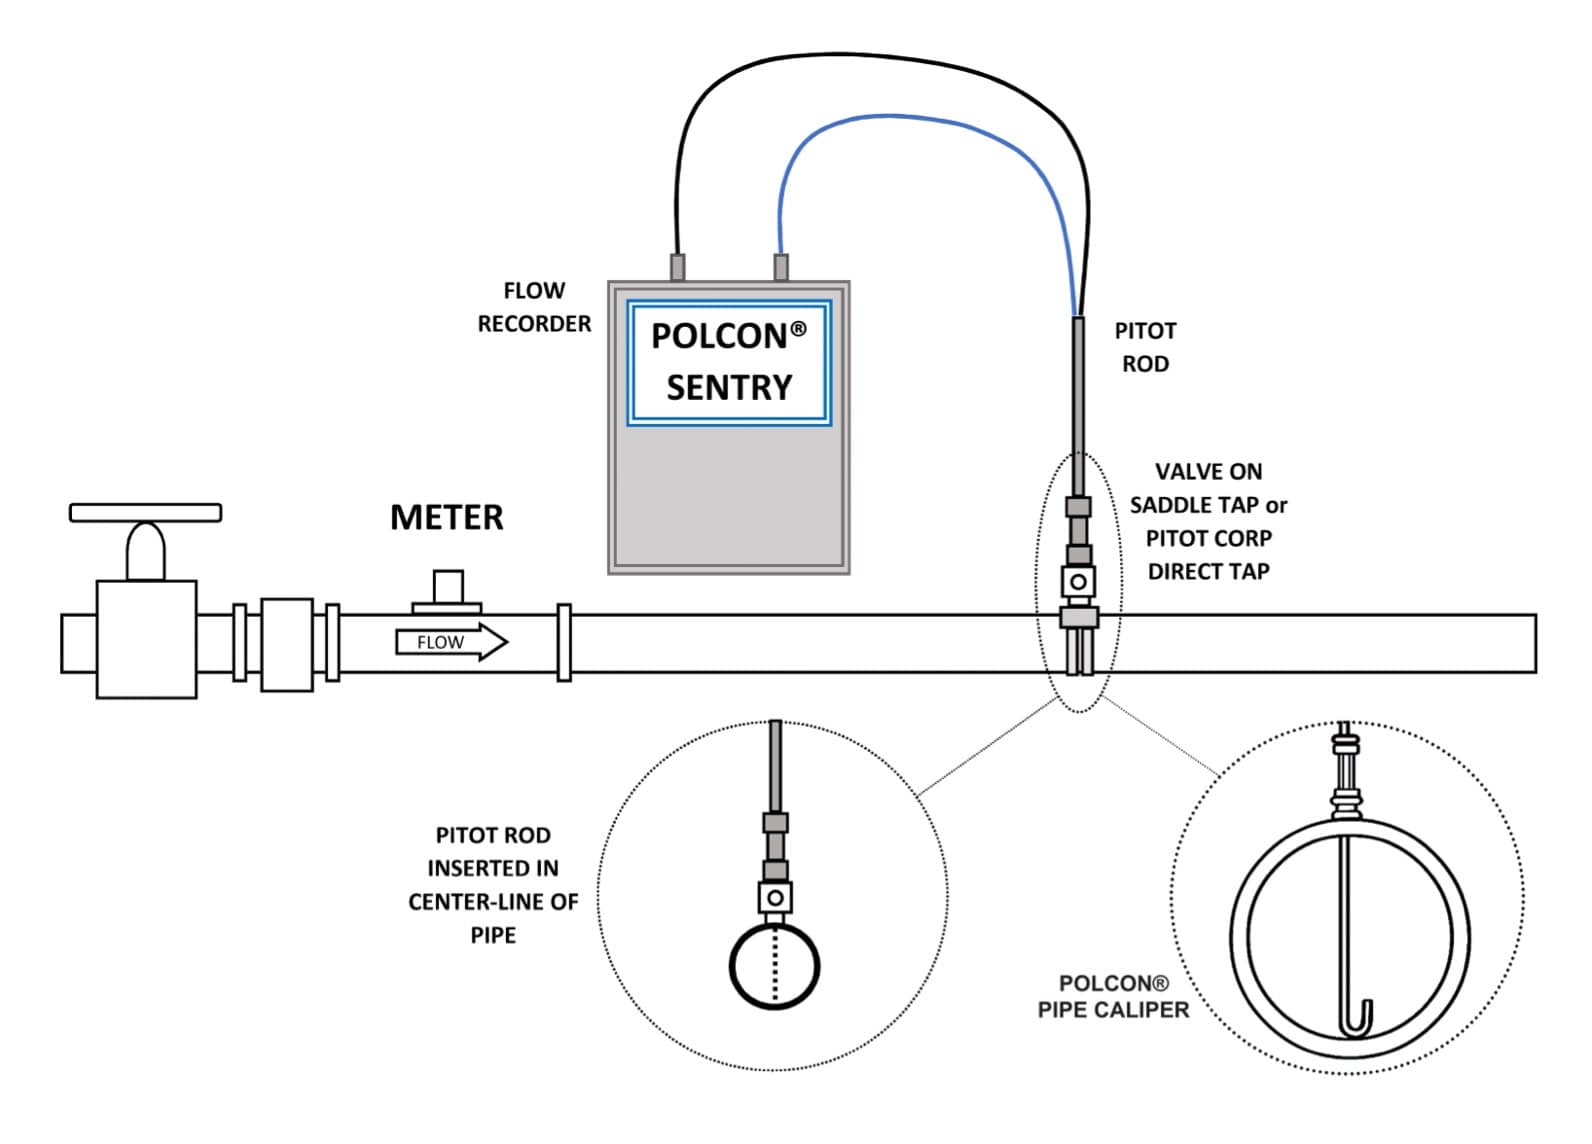 ME Simpson uses Polcon products for water system testing such as the standard pitot test diagramed here.